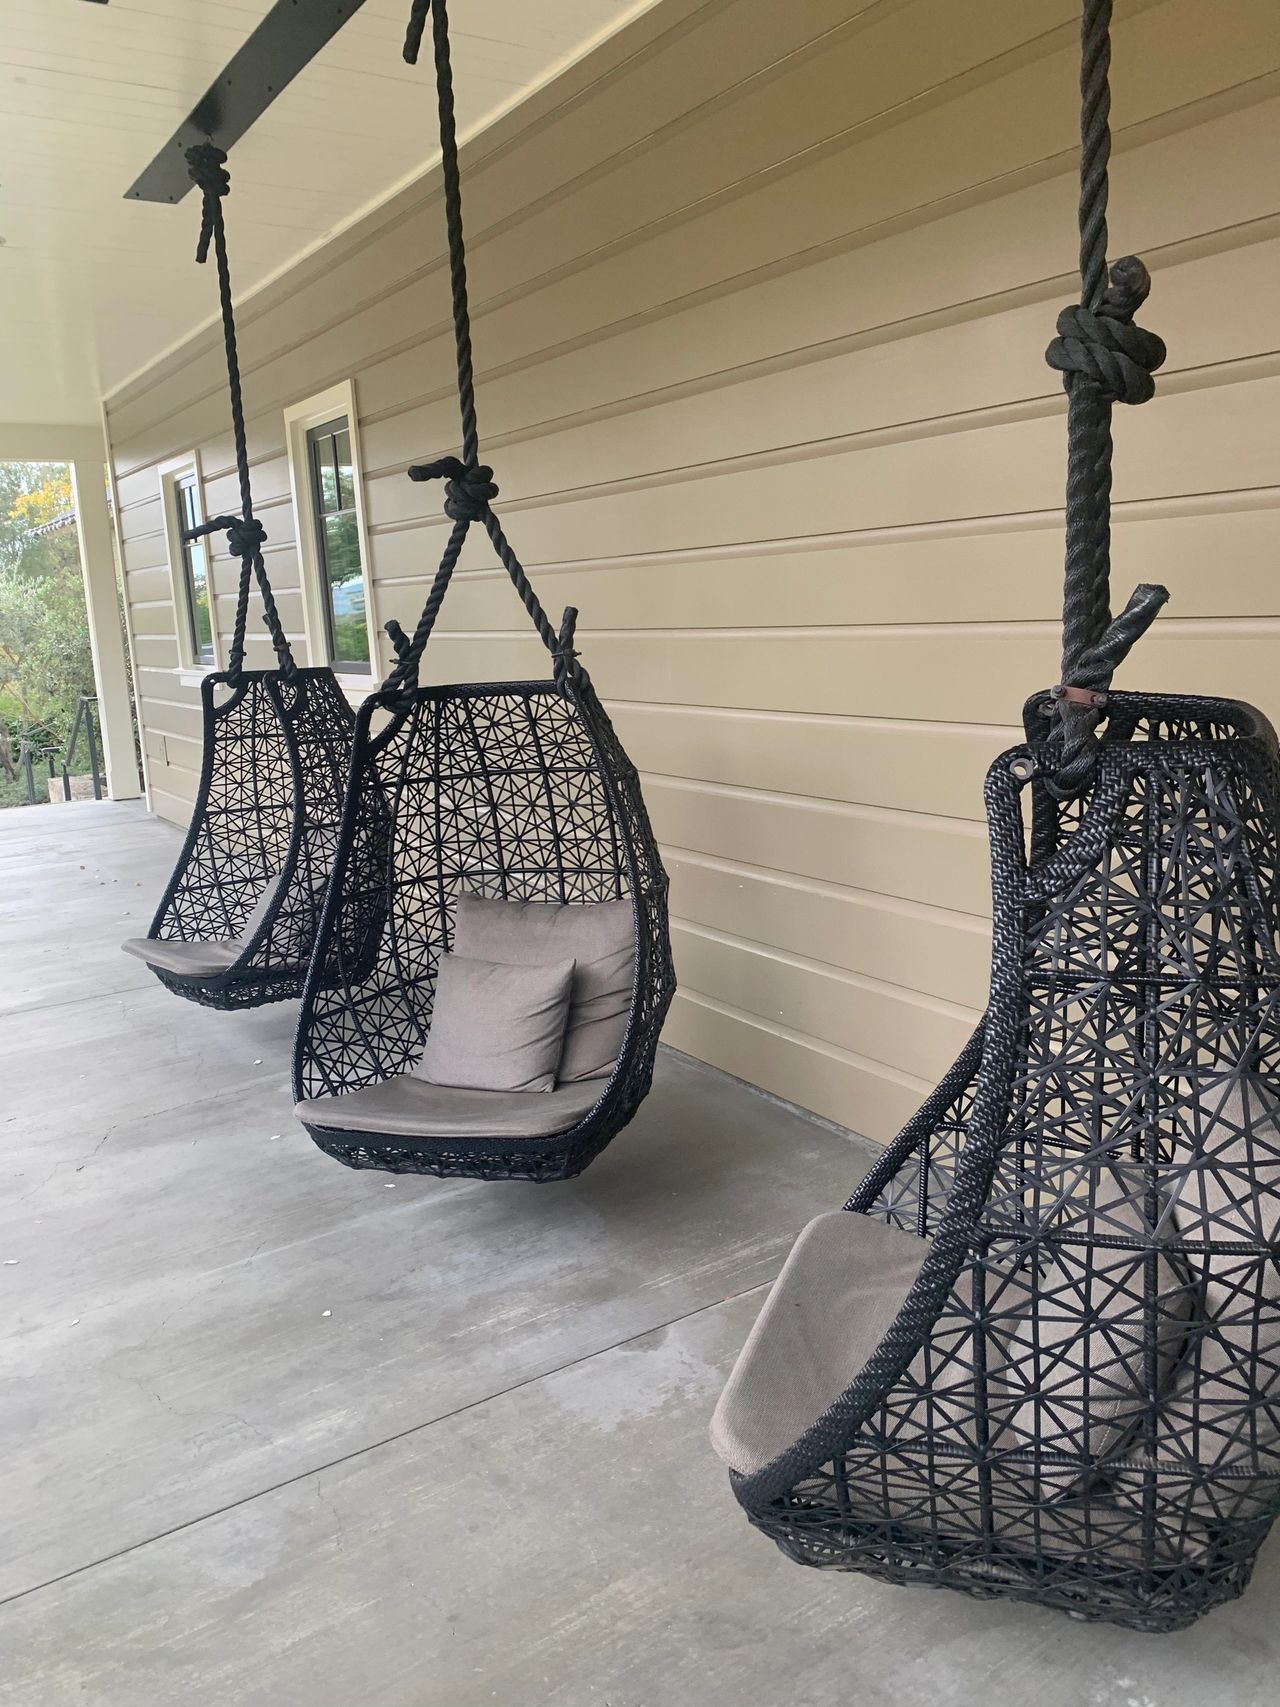 Swing chairs on the patio